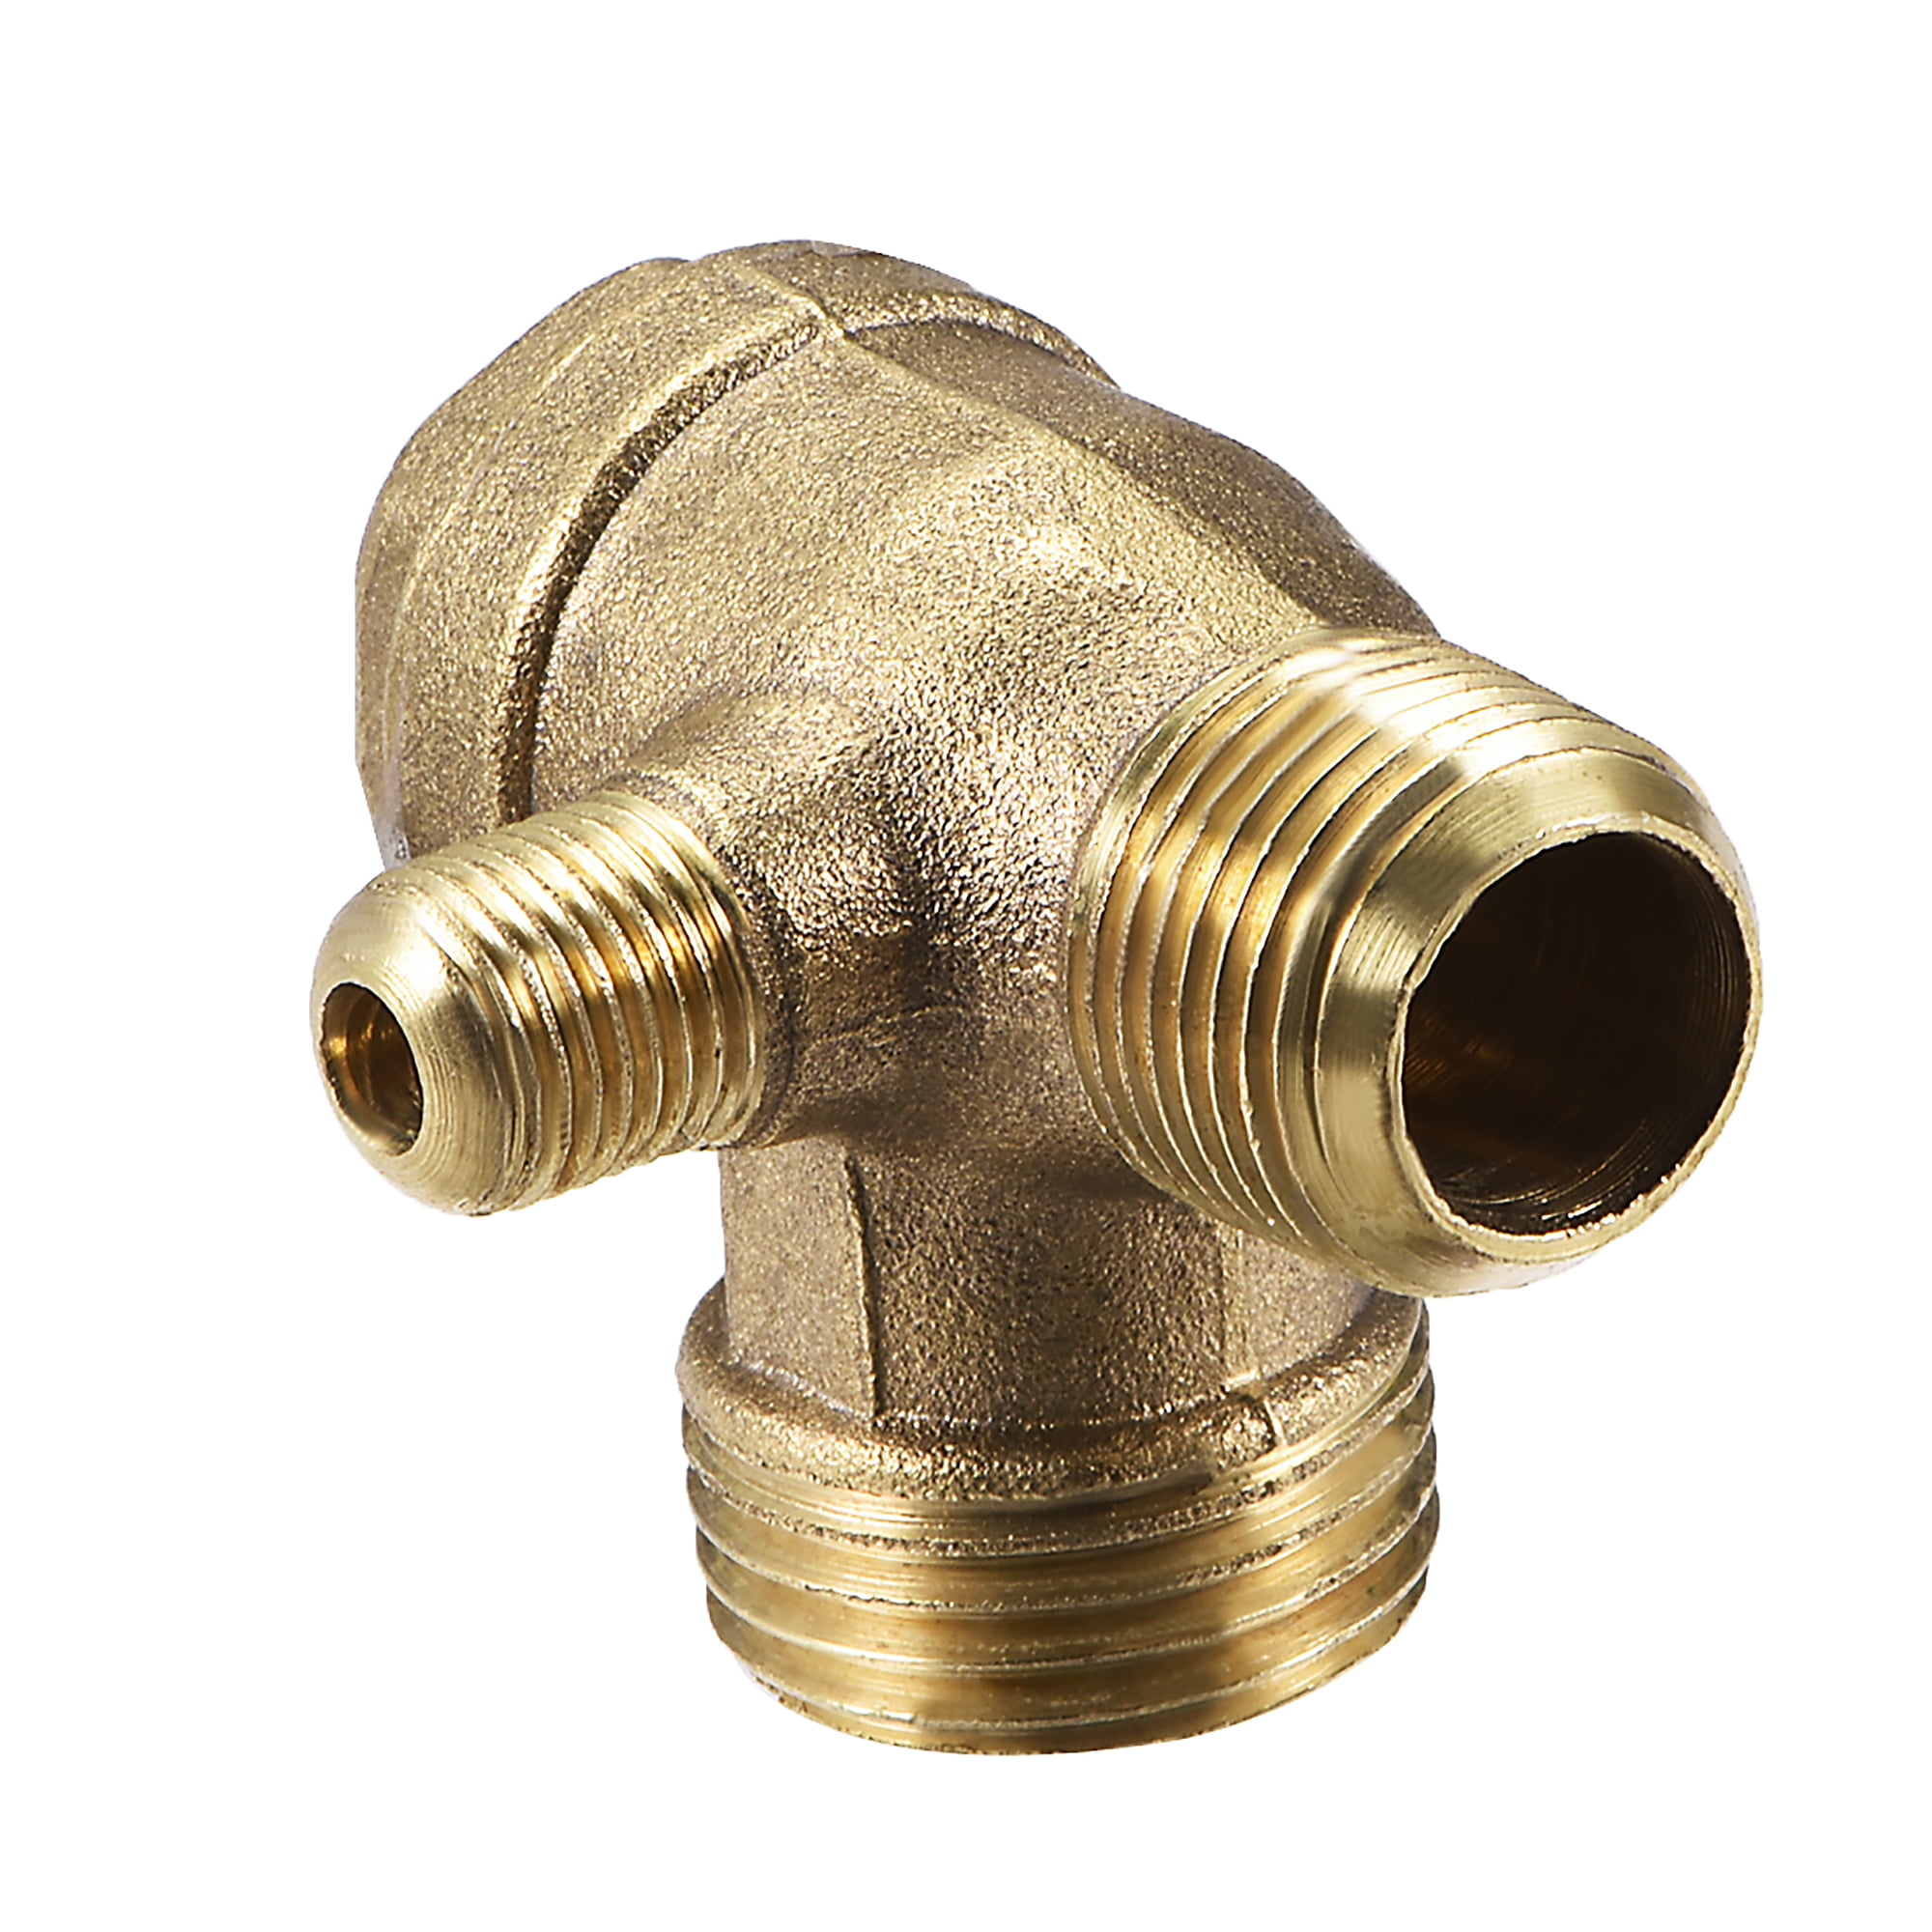 Air Compressor Check Valve 90 Degree Male Threaded Brass Connector G3/8" x G1/4" 